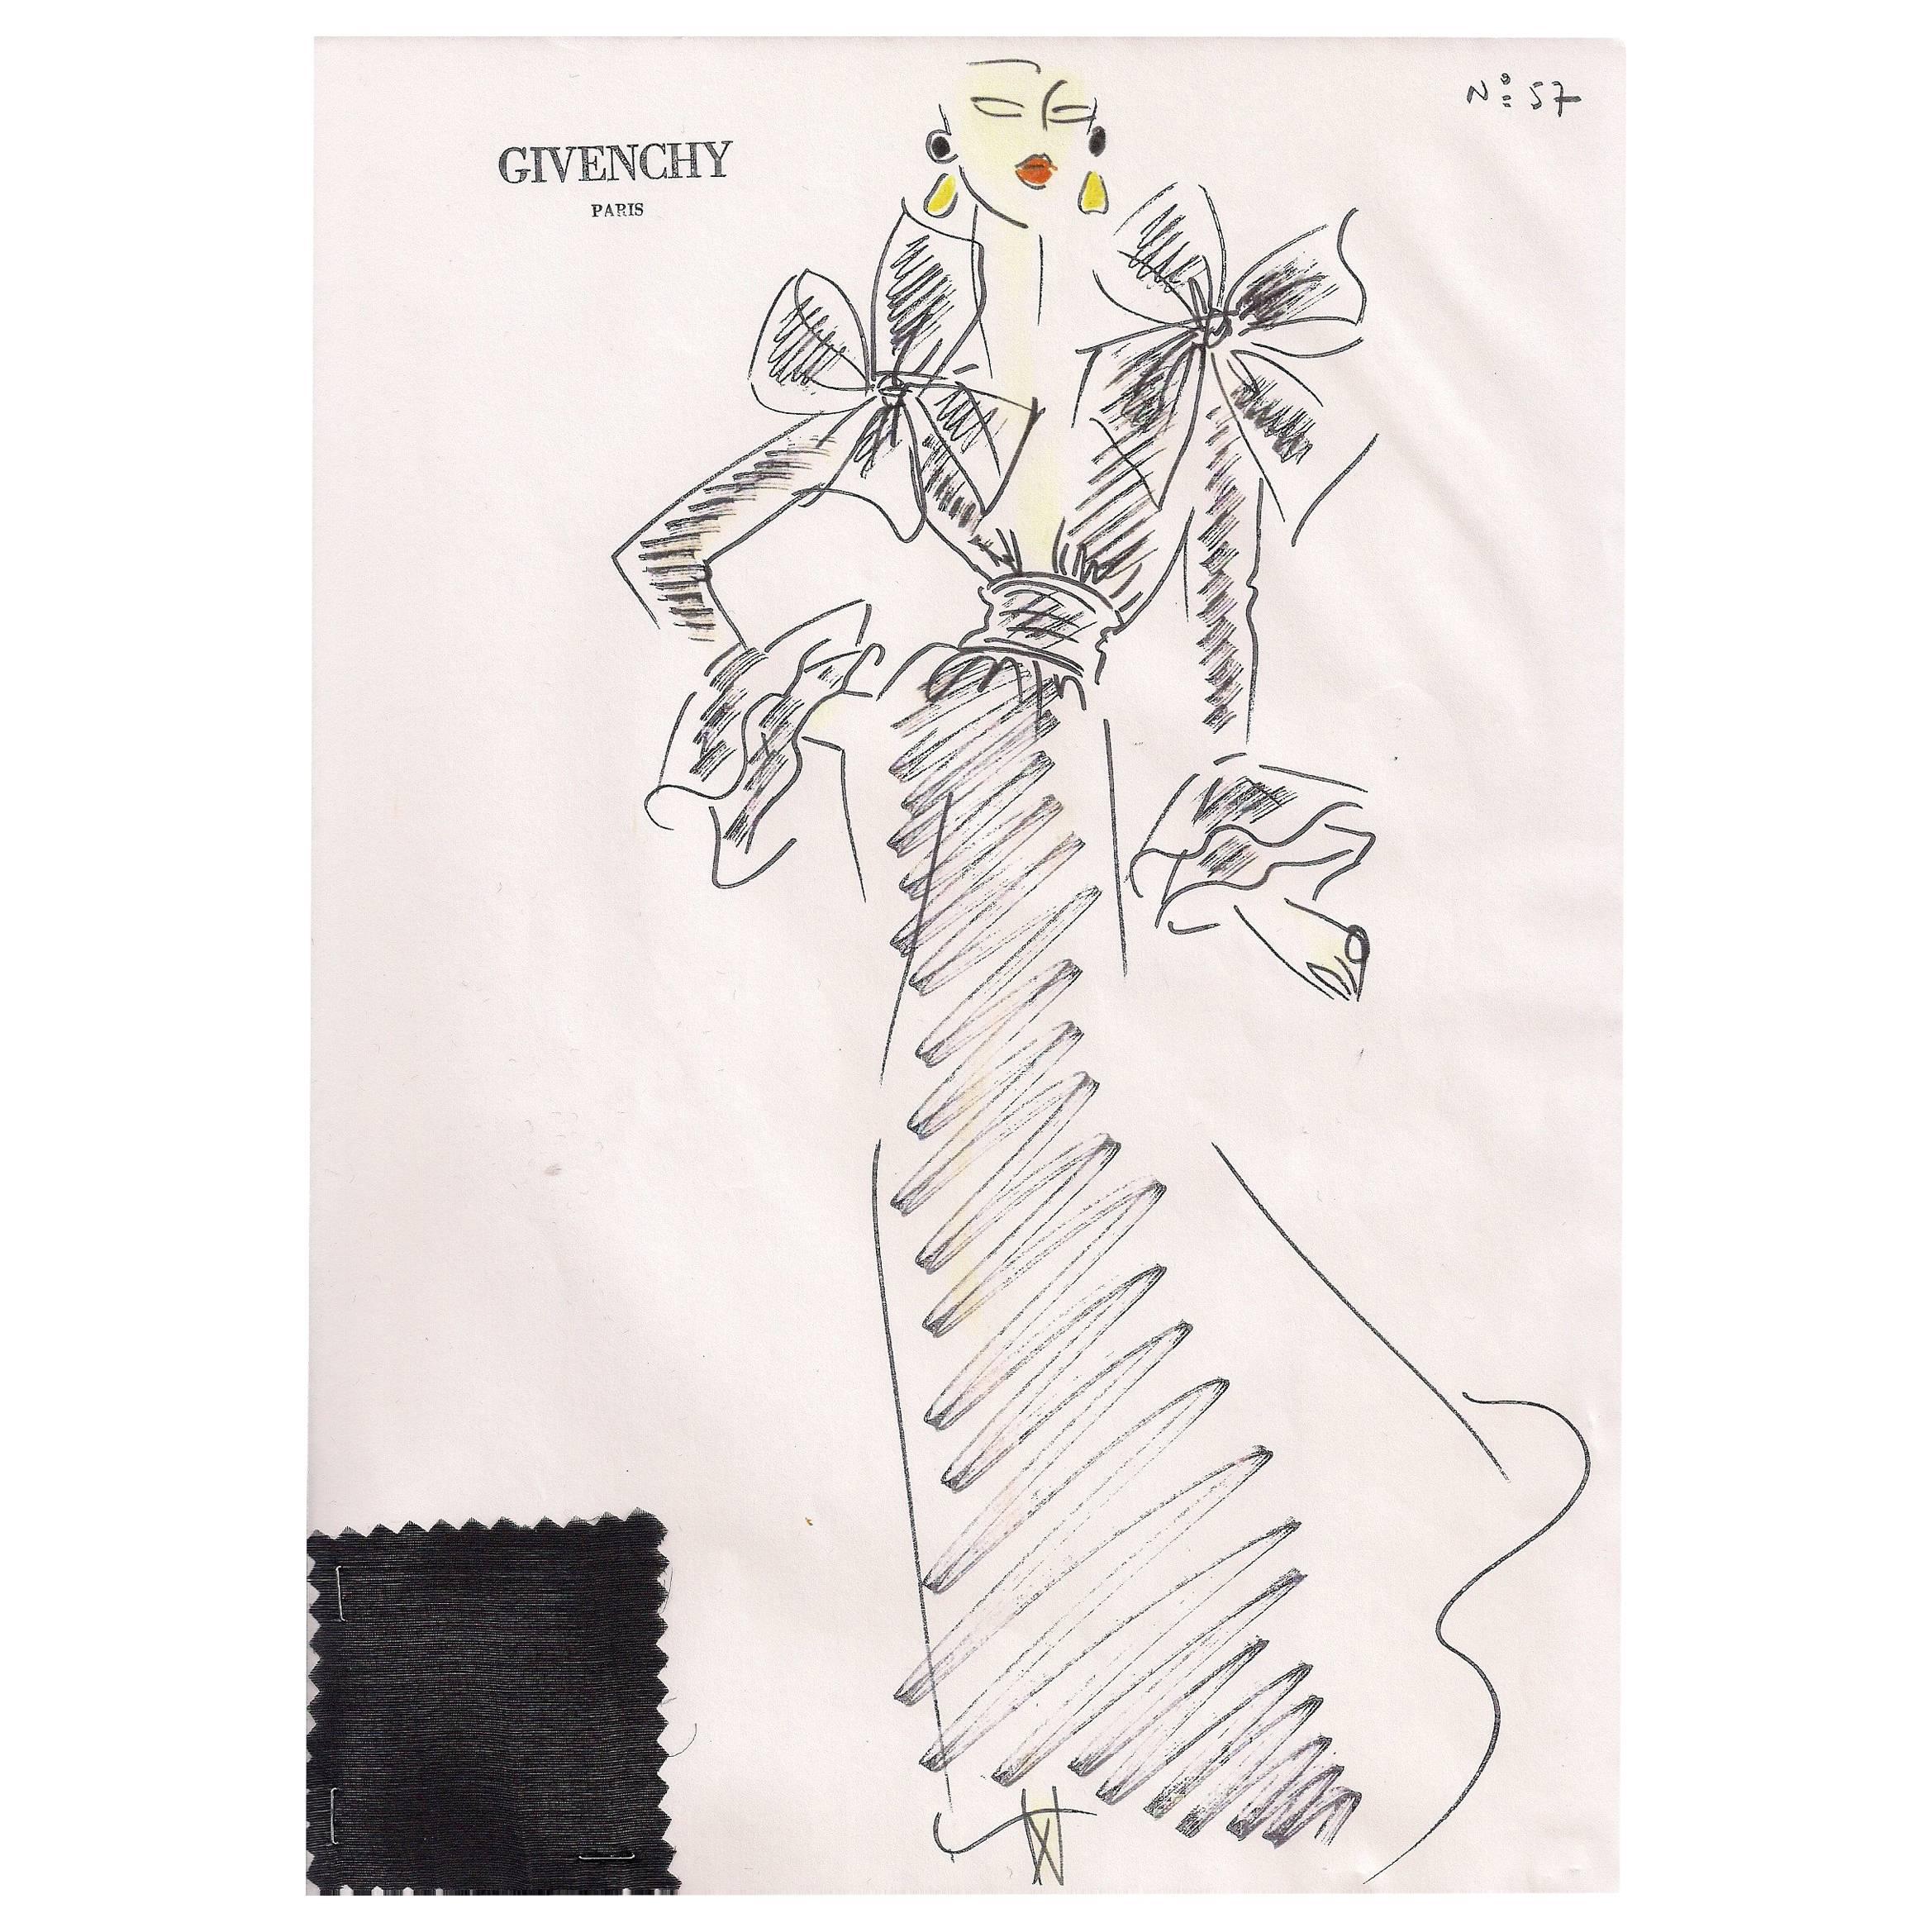 Givenchy Croquis of an Evening Gown with Bows with Attached Fabric Swatch